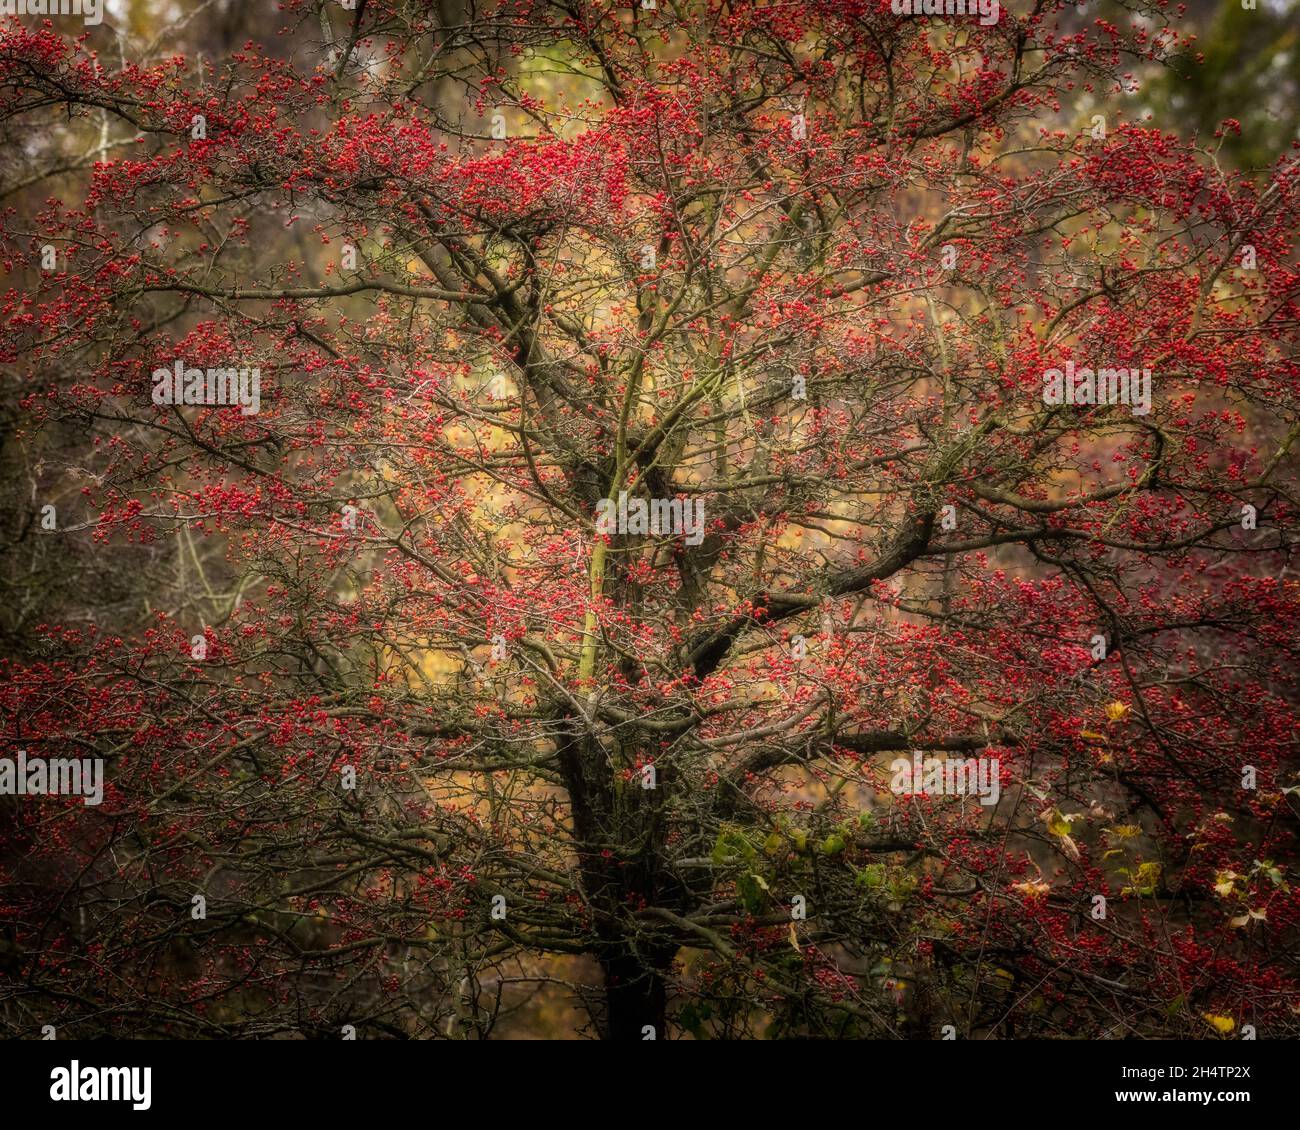 Vibrant autumnal fall red berries on a tree at Birches Valley, Cannock Chase in Staffordshire. Stock Photo